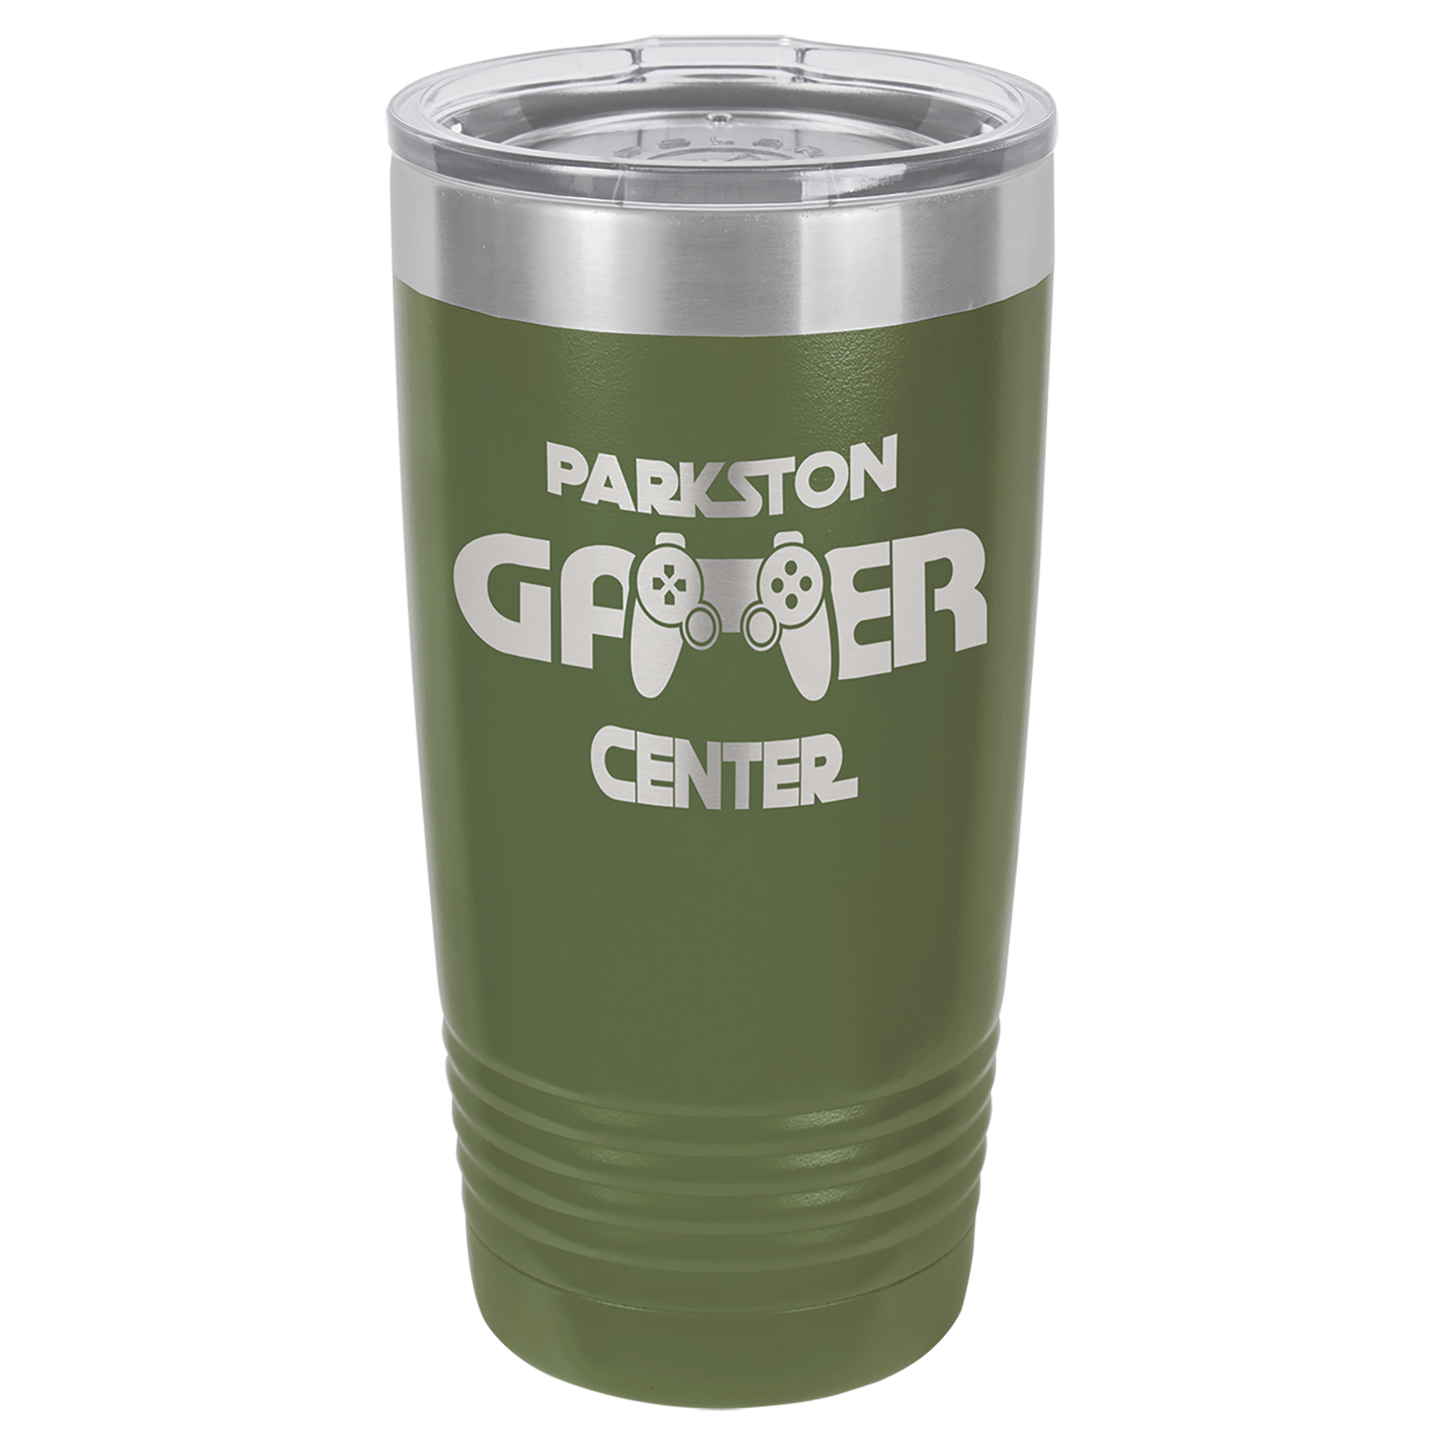 Hansey for Governor 20oz Ringneck Tumbler with Magnetic Lid